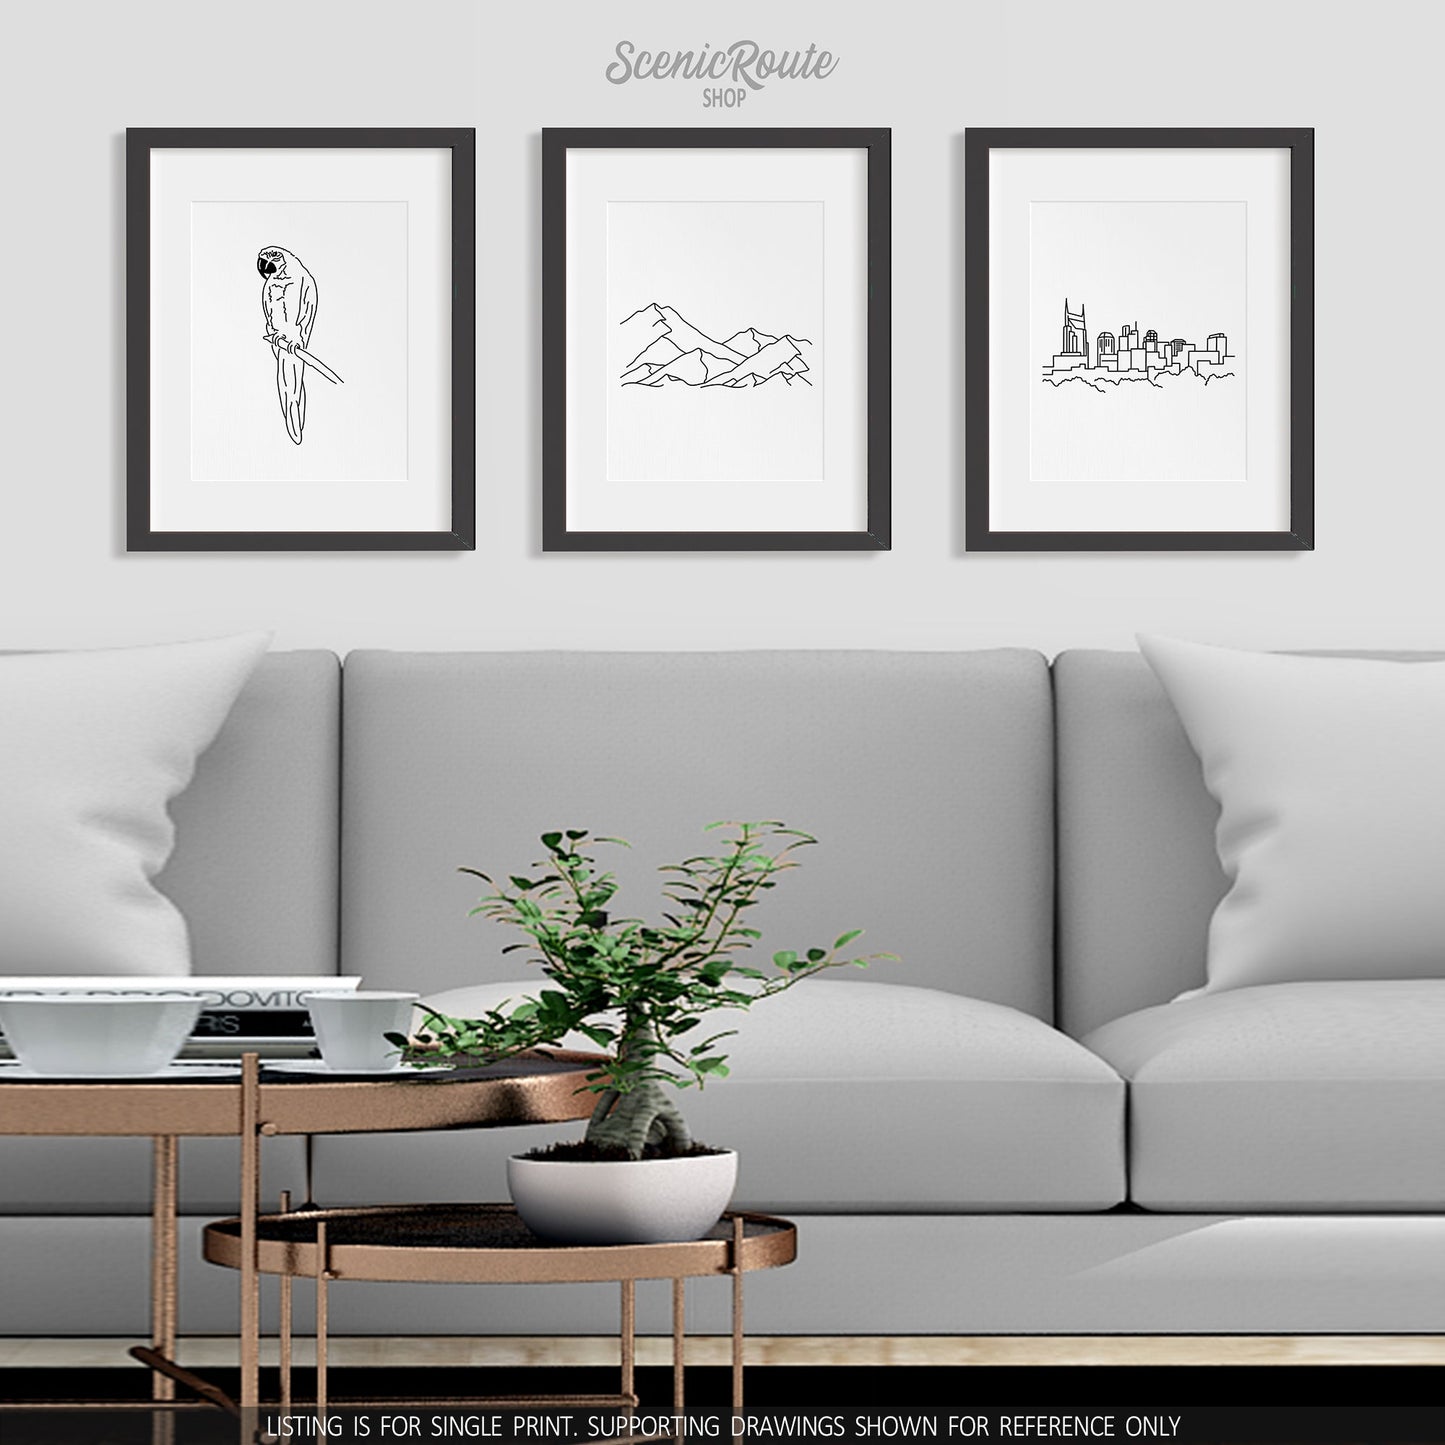 A group of three framed drawings on a wall above a couch. The line art drawings include a Parrot, a Mountain Range, and the Nashville Skyline